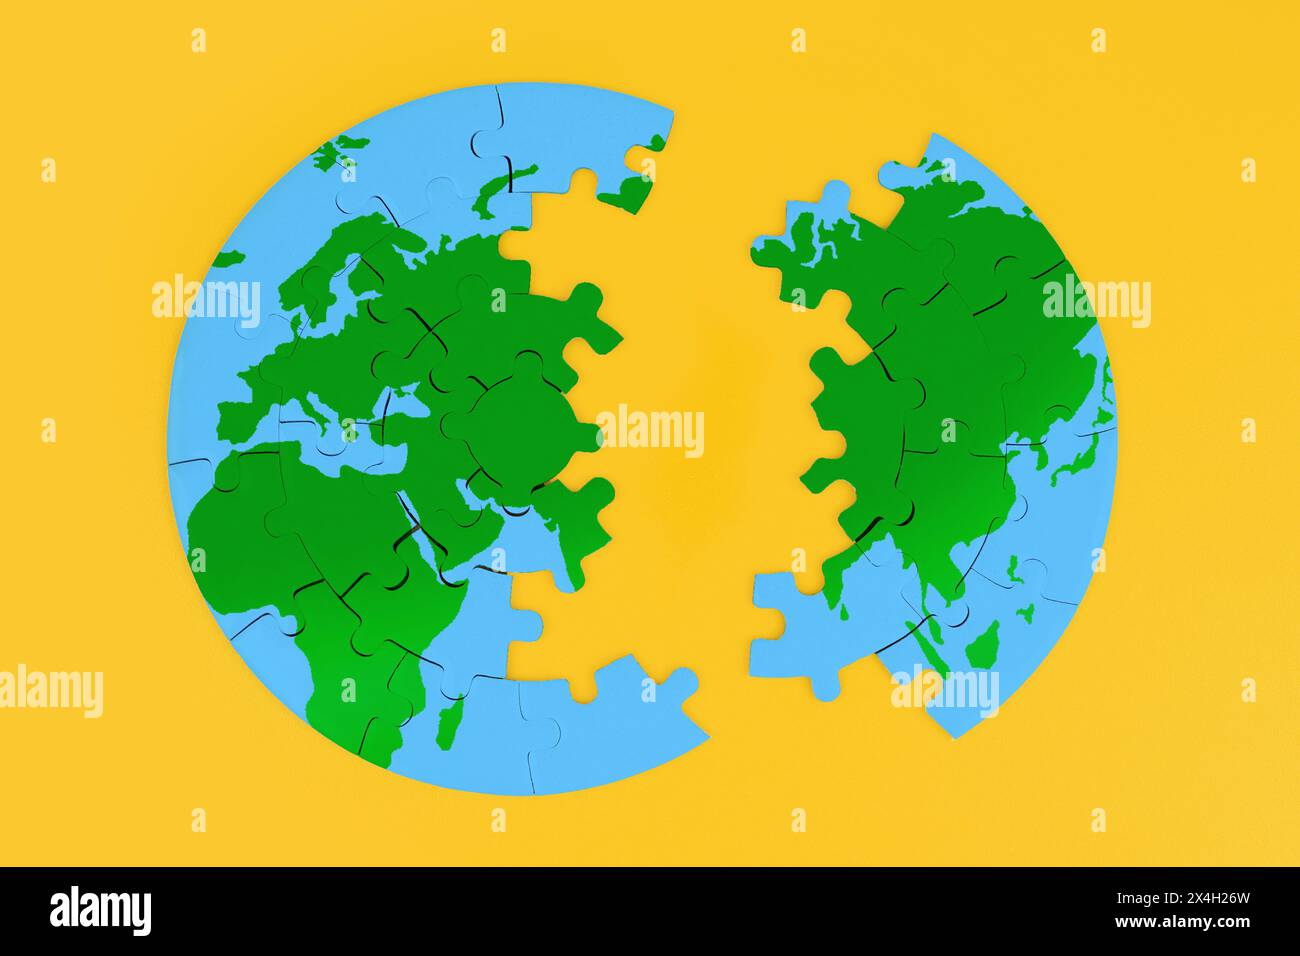 Top view of a globe shaped jigsaw puzzle split into two parts on a vibrant yellow background. Need for unity and the importance of working together. Stock Photo